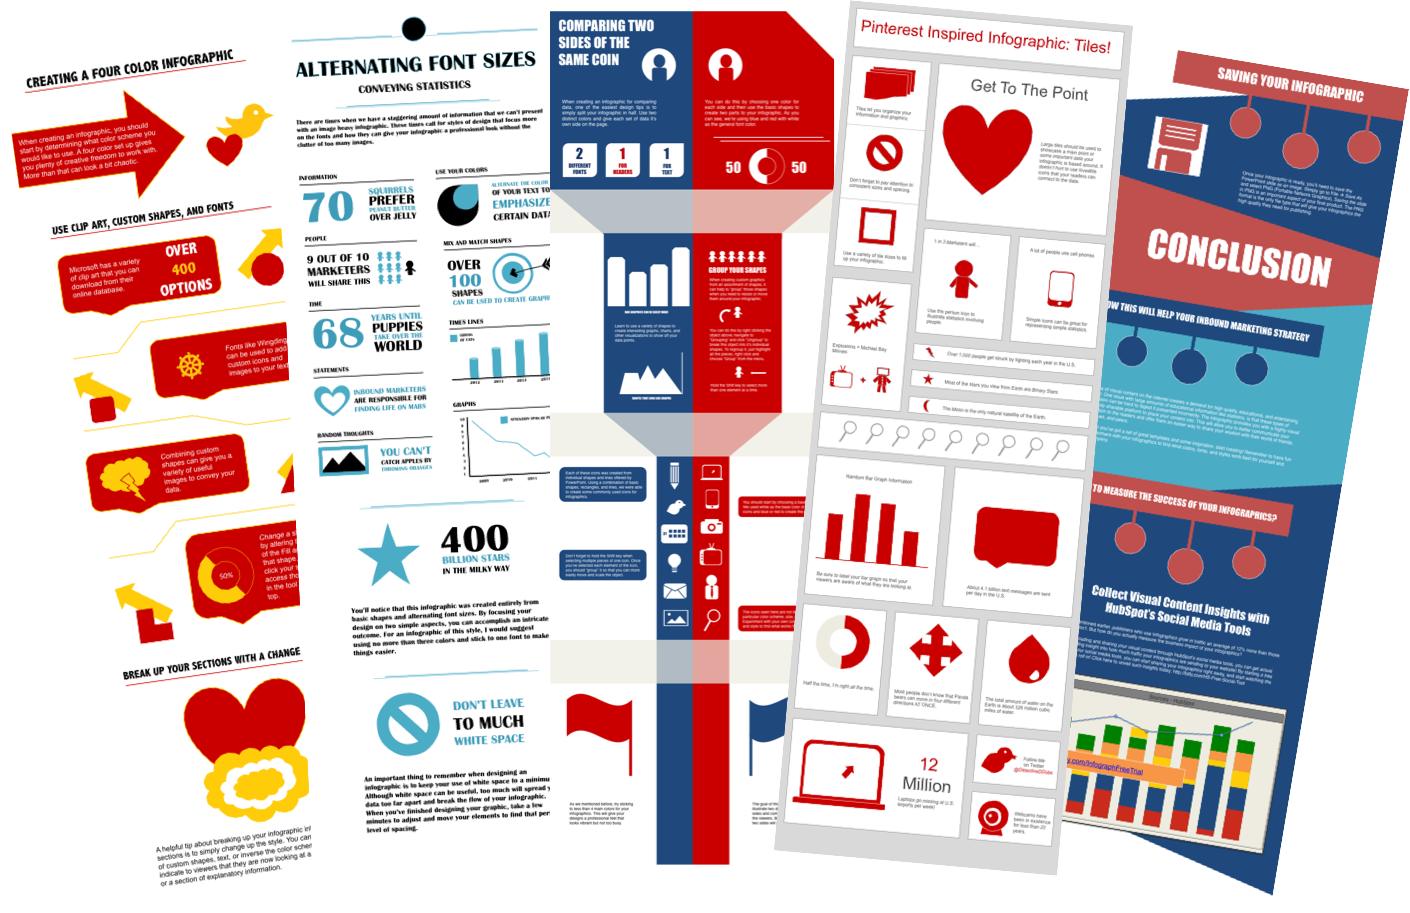 16 Photos of Free Infographic Templates For PowerPoint